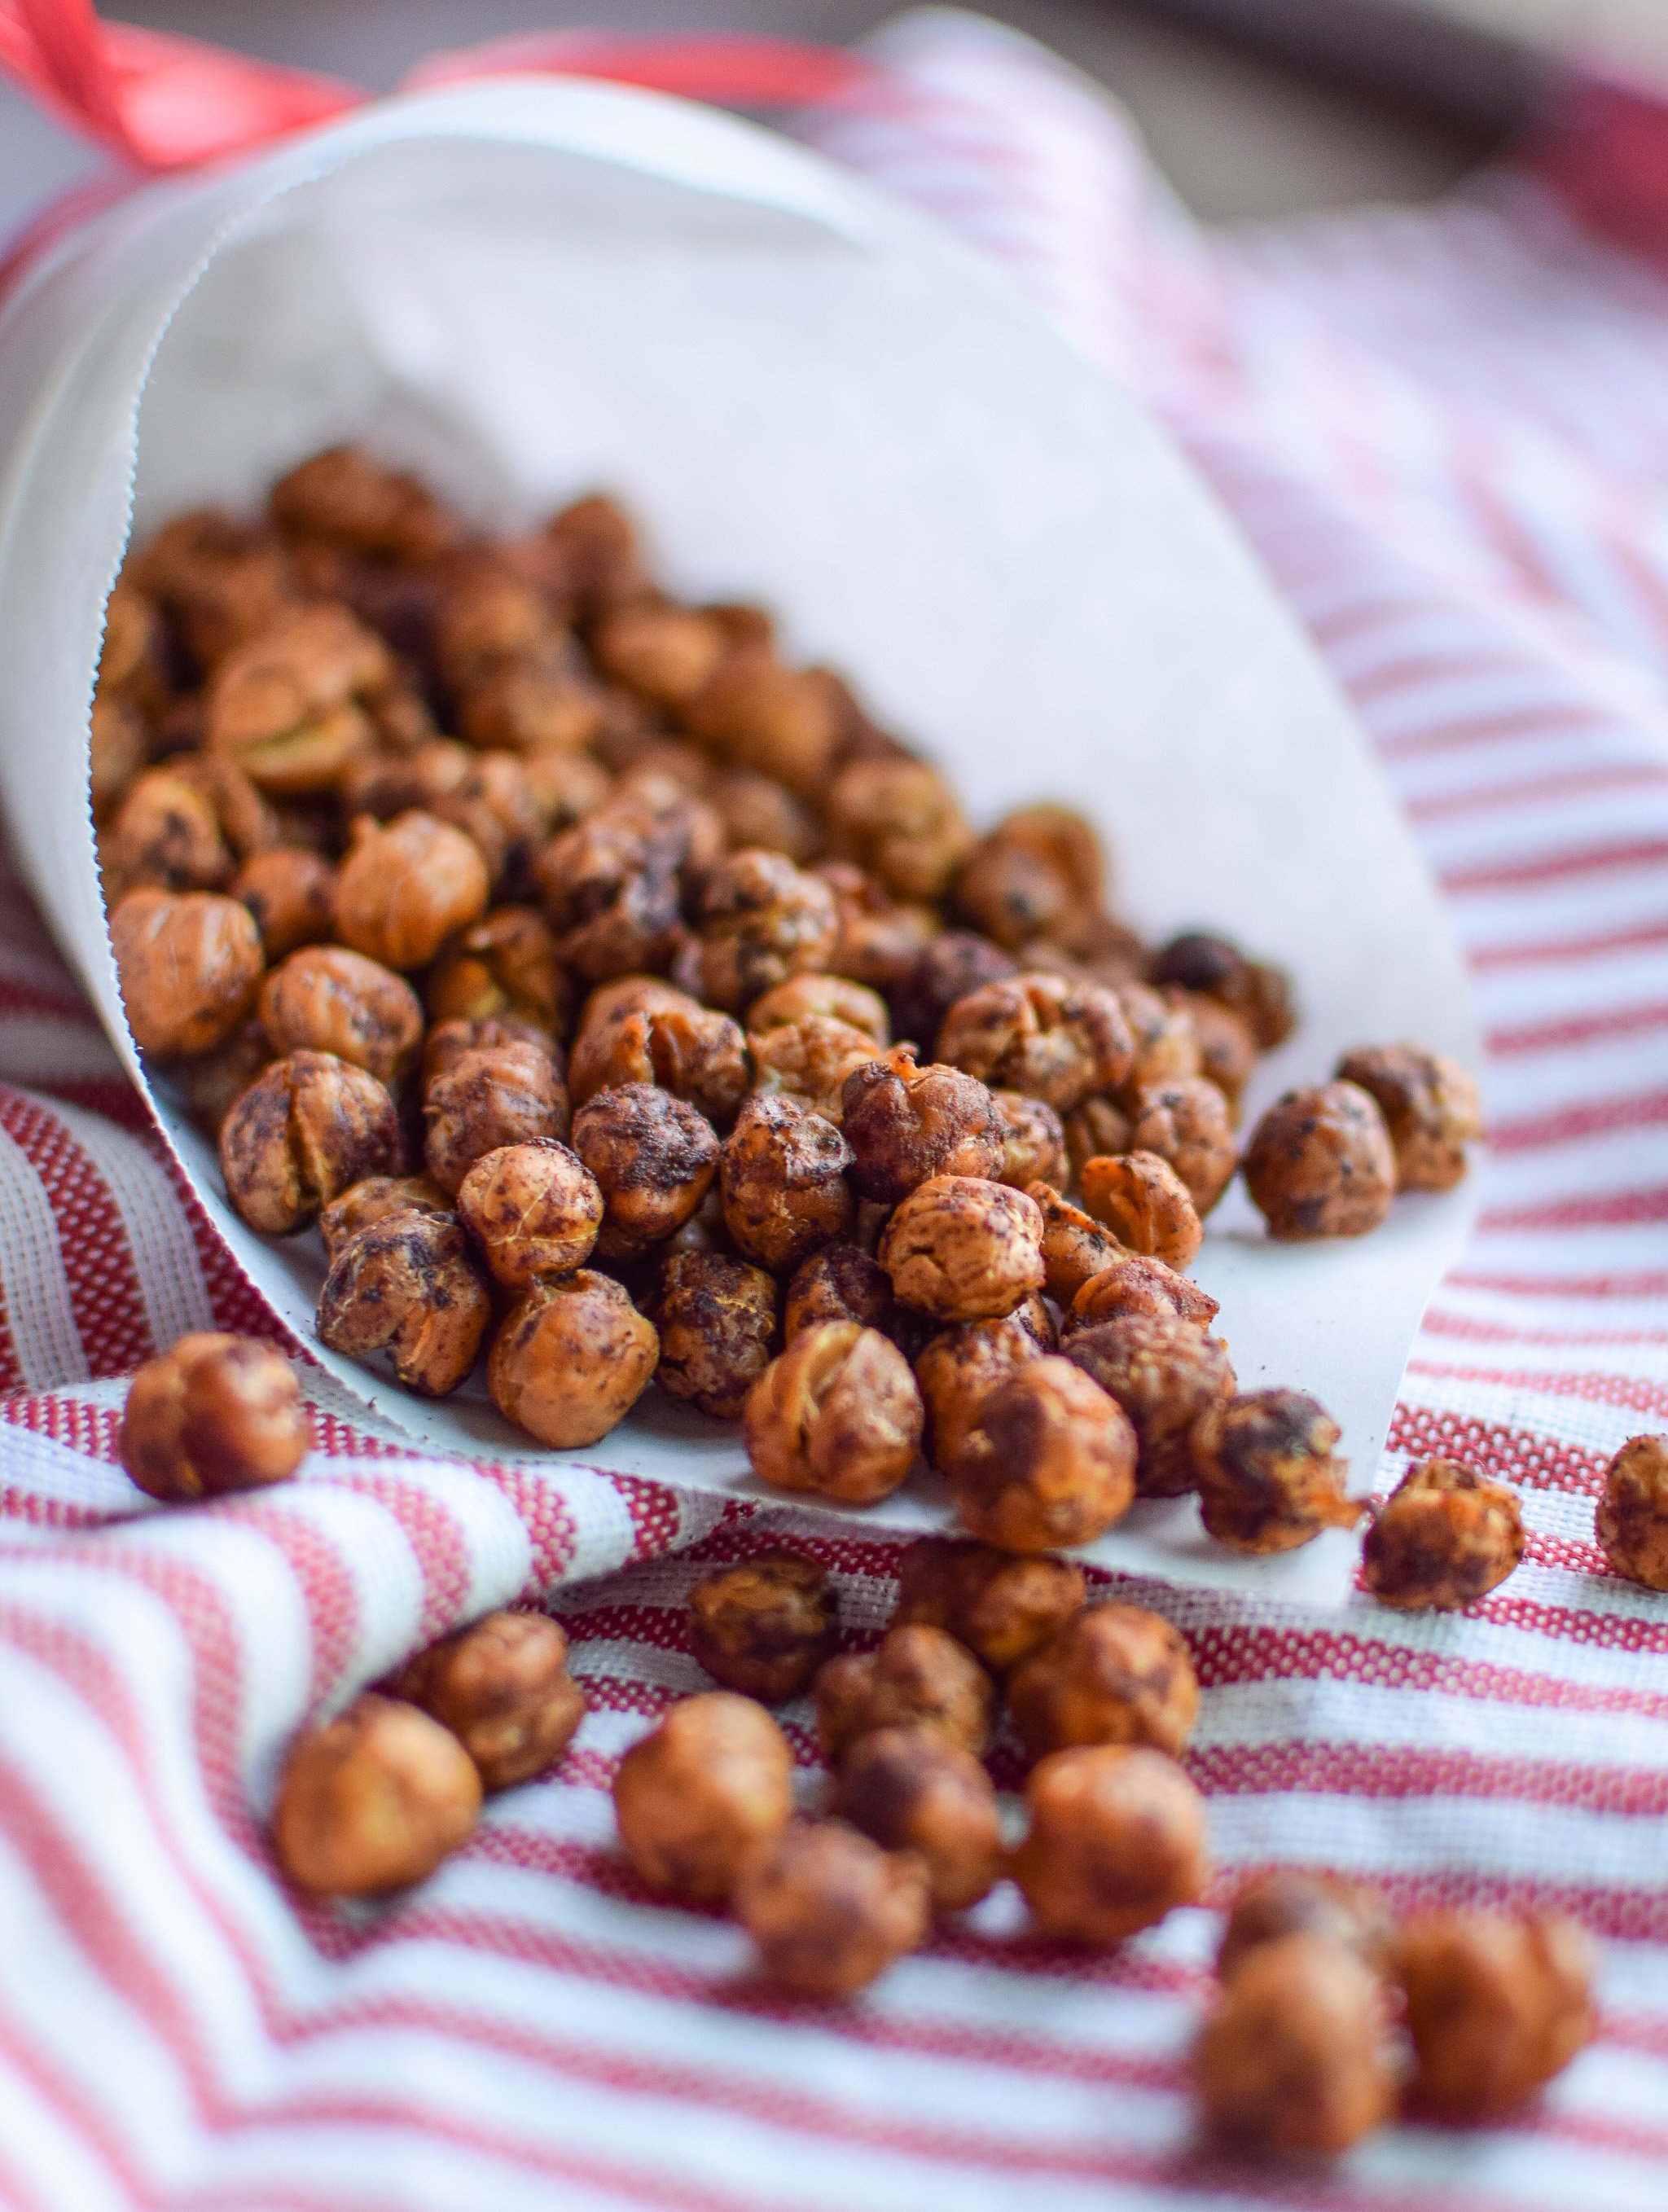 Crispy Cinnamon Roasted Chickpeas - A healthy crunch holiday treat! Four simple ingredients and your home smells amazing! - ProjectMealPlan.com